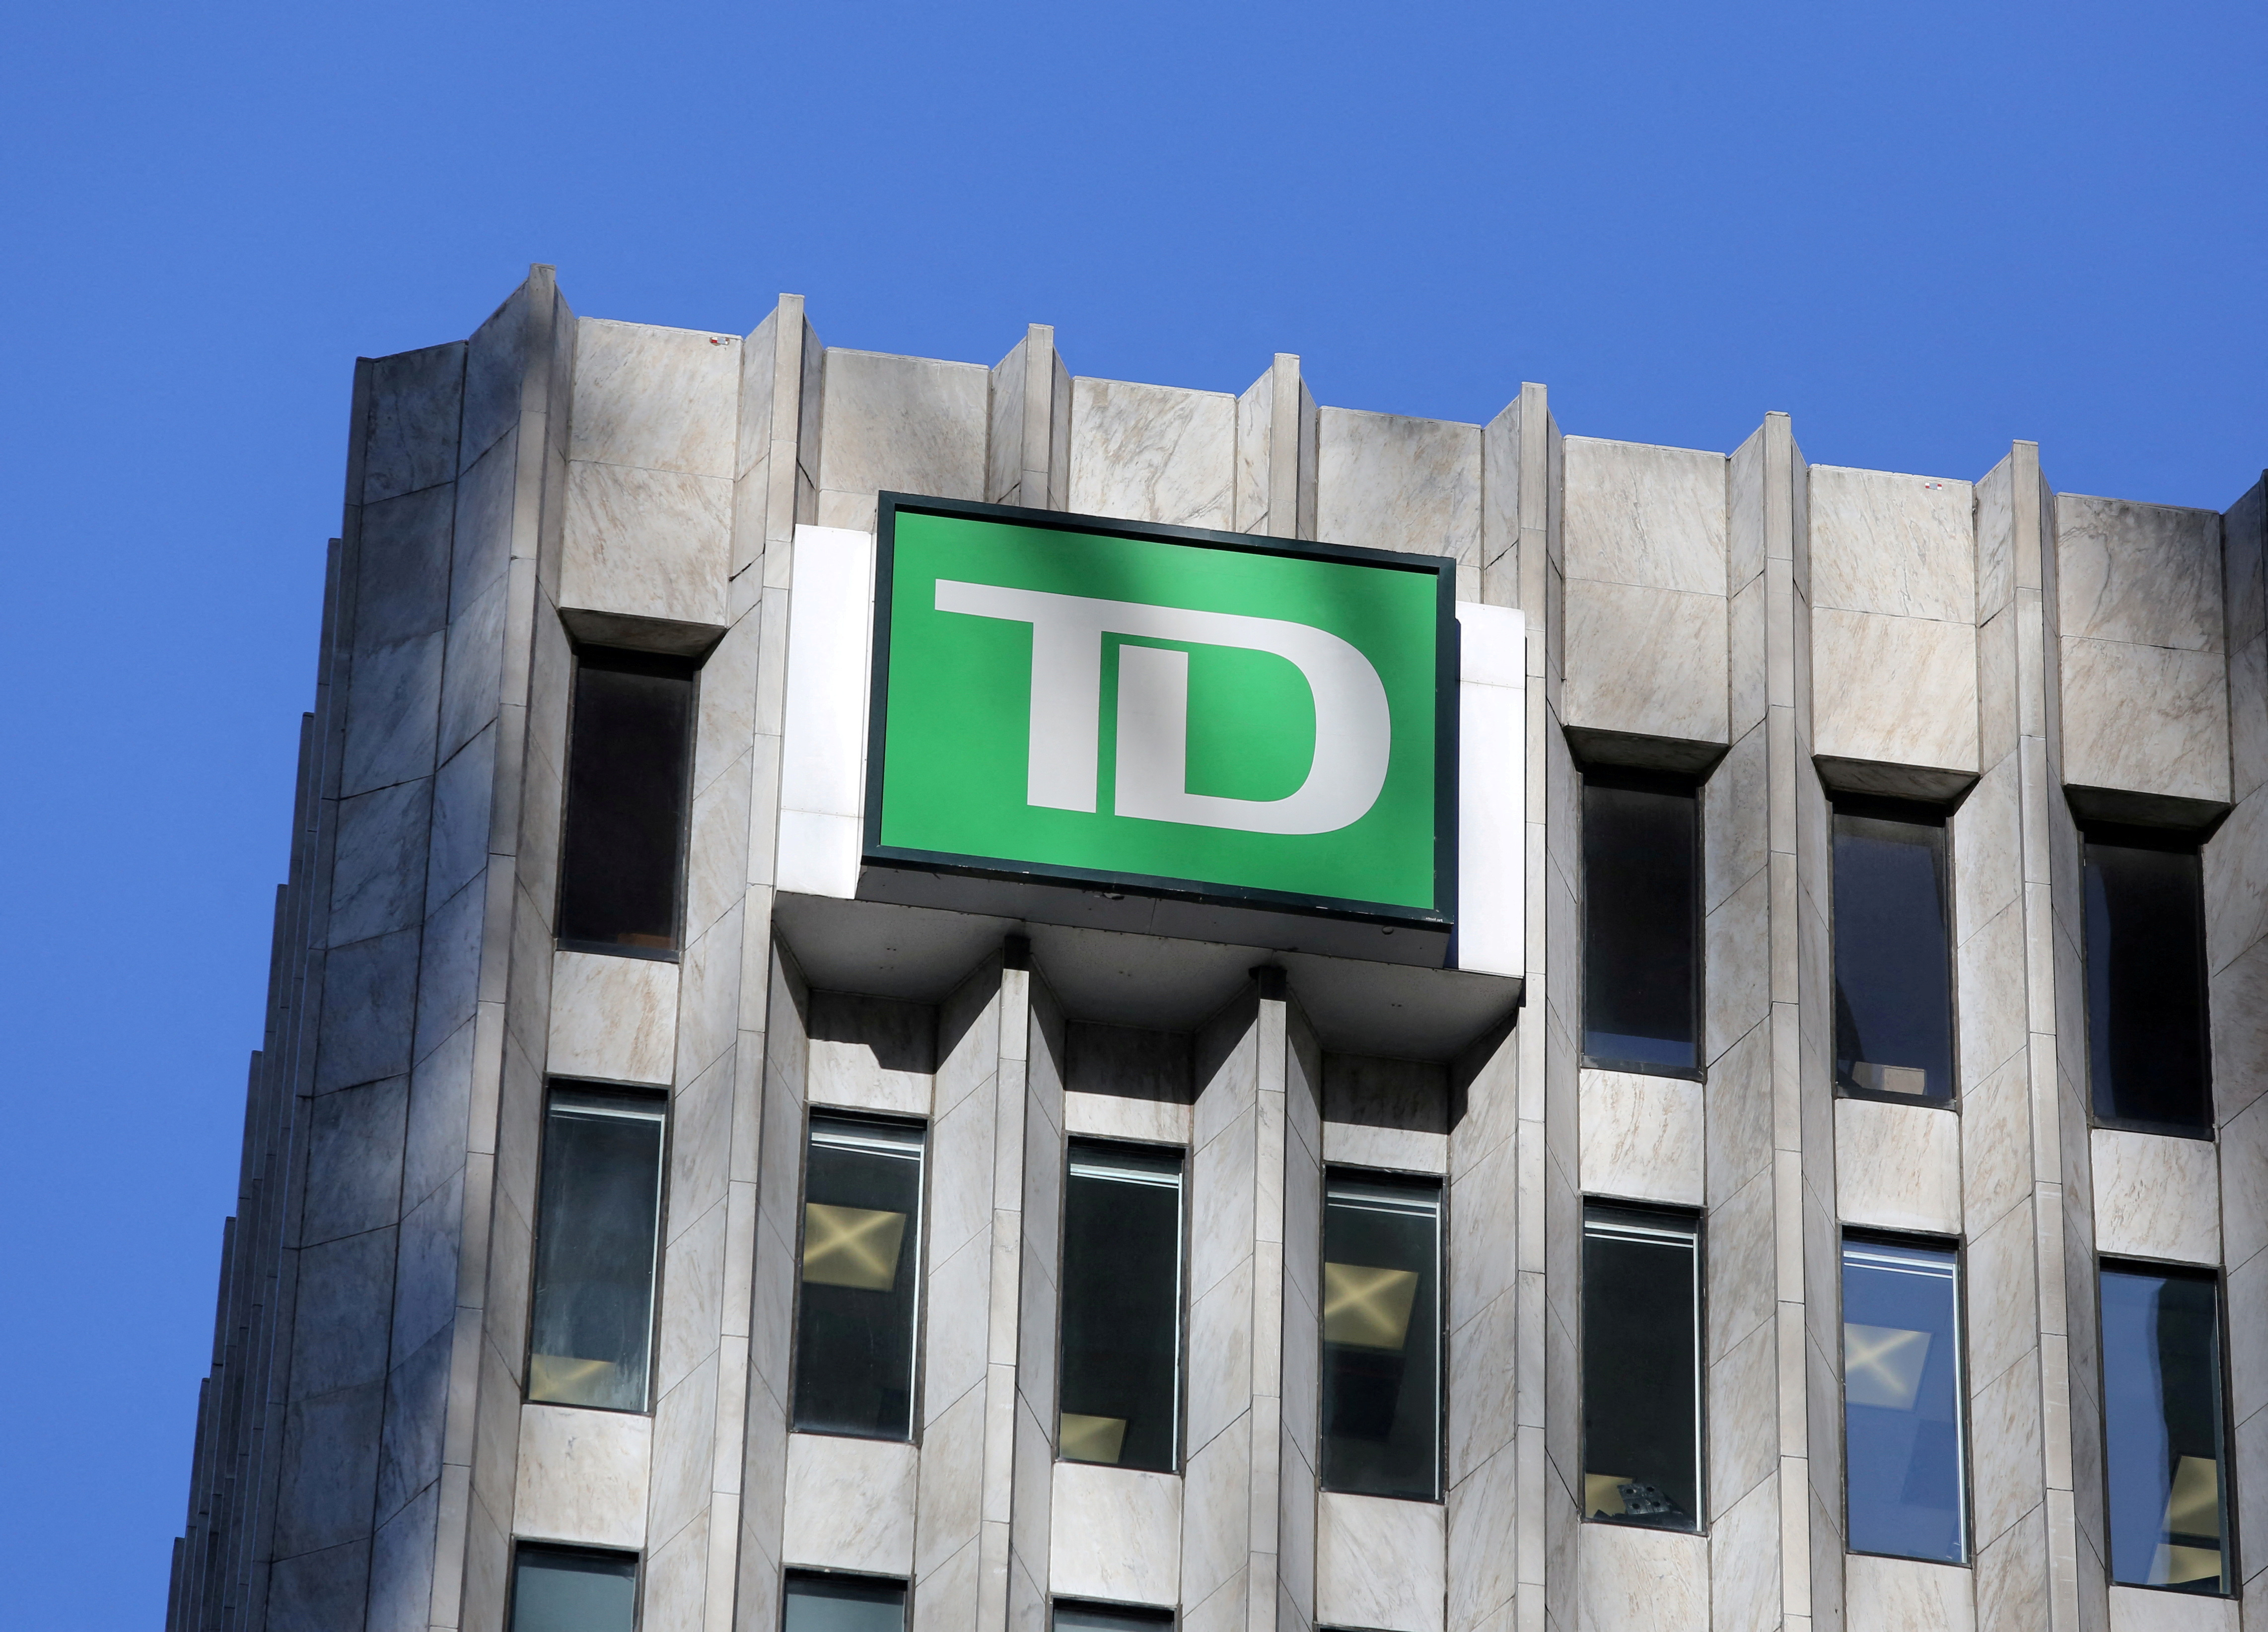 &copy; Reuters. FILE PHOTO: The Toronto Dominion (TD) bank logo is seen on a building in Toronto, Ontario, Canada March 16, 2017. REUTERS/Chris Helgren/File Photo